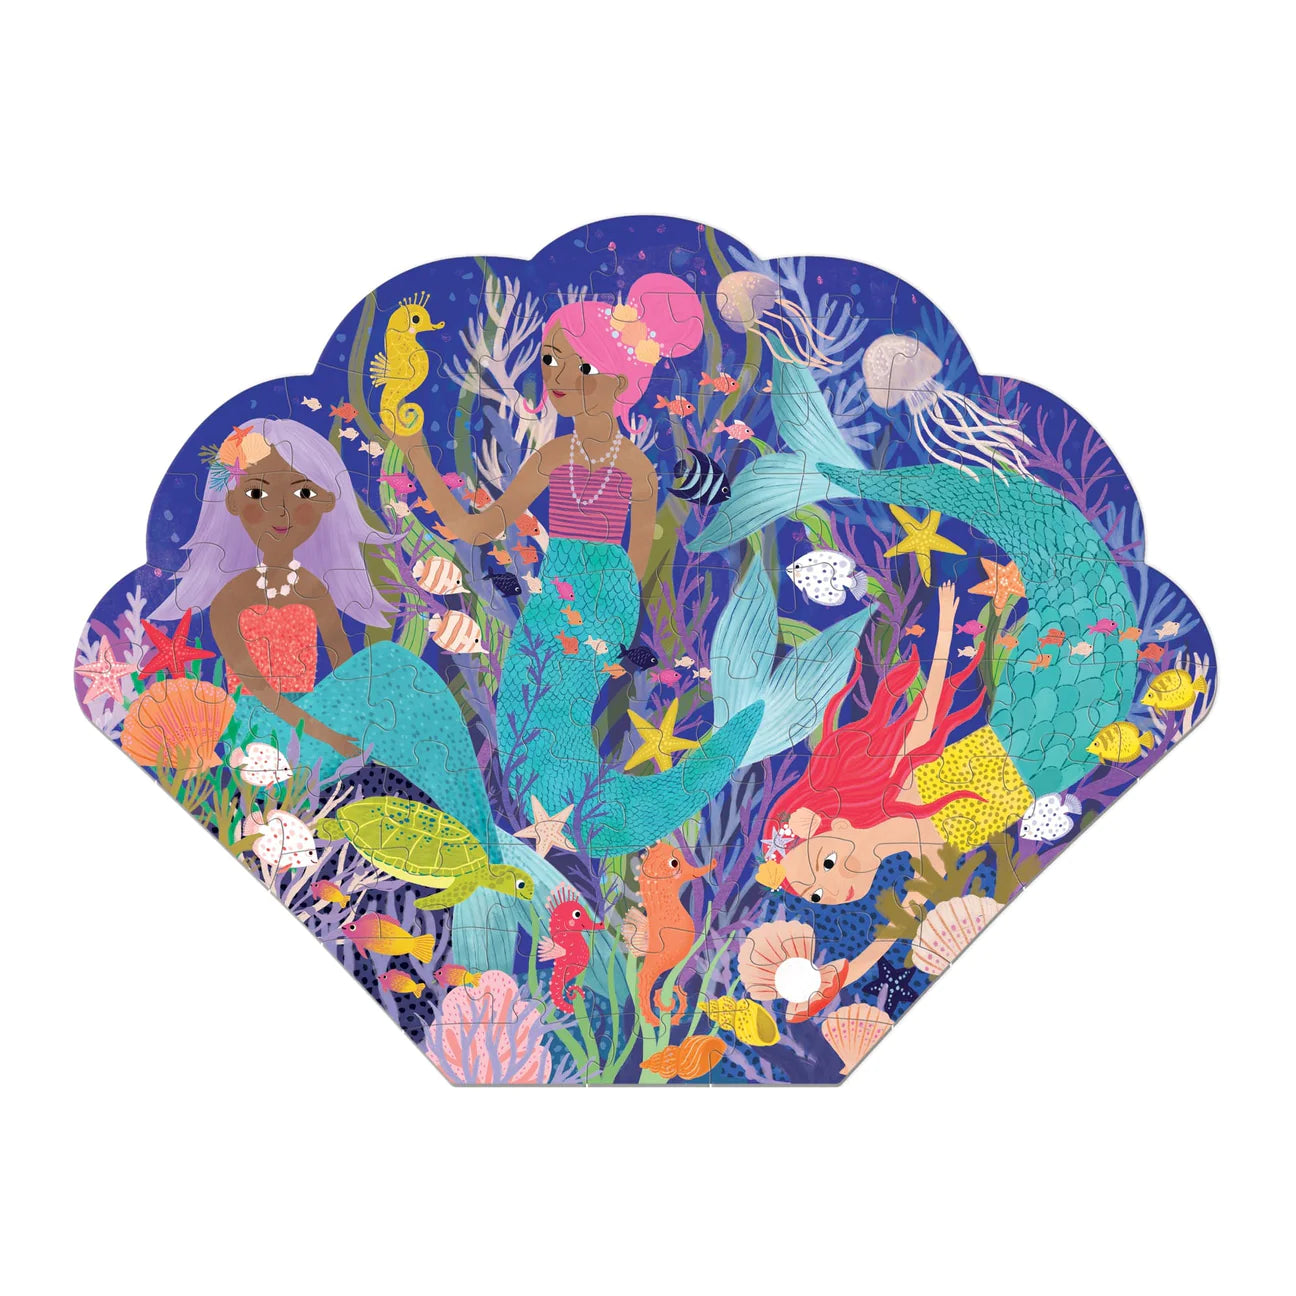 Mud Puppy | 75pc Shaped Puzzle - Mermaid Cove